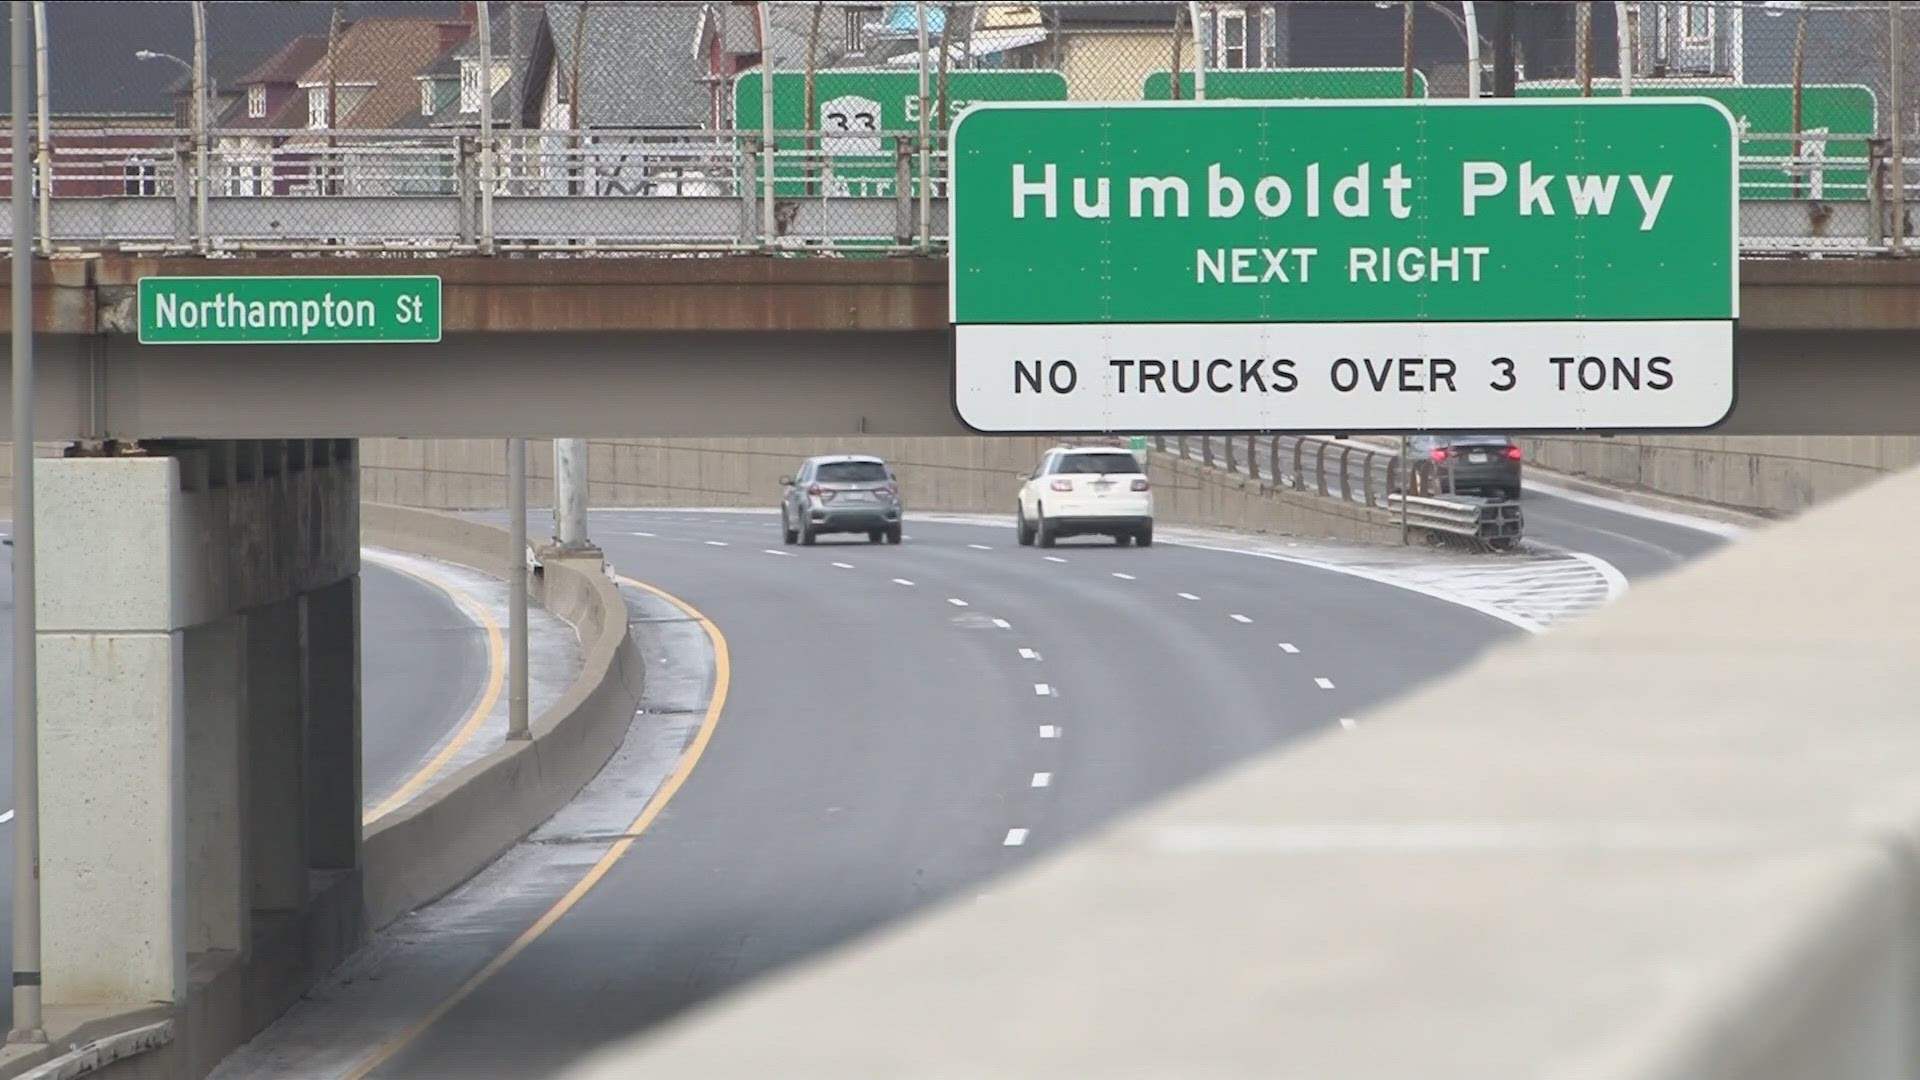 A lawsuit against the NYSDOT has been filed by residents of the Humboldt Parkway asks a judge to force the required studies on the impact of the $1B project.